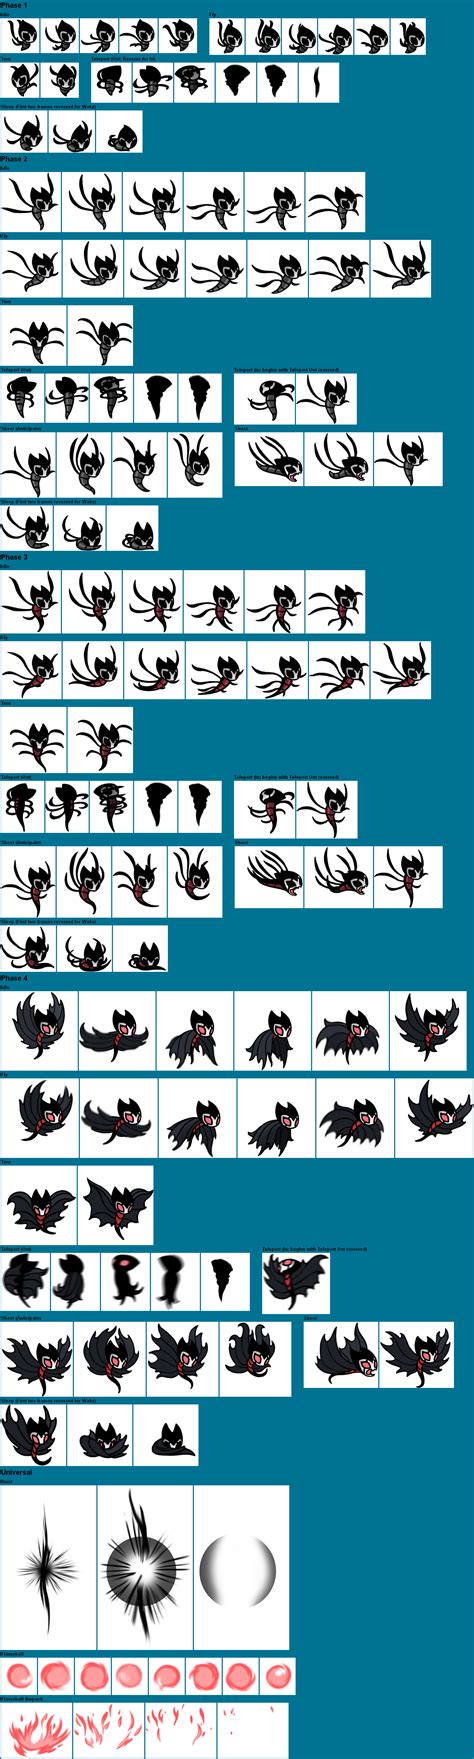 The Hollow Knight Sprite Sheet